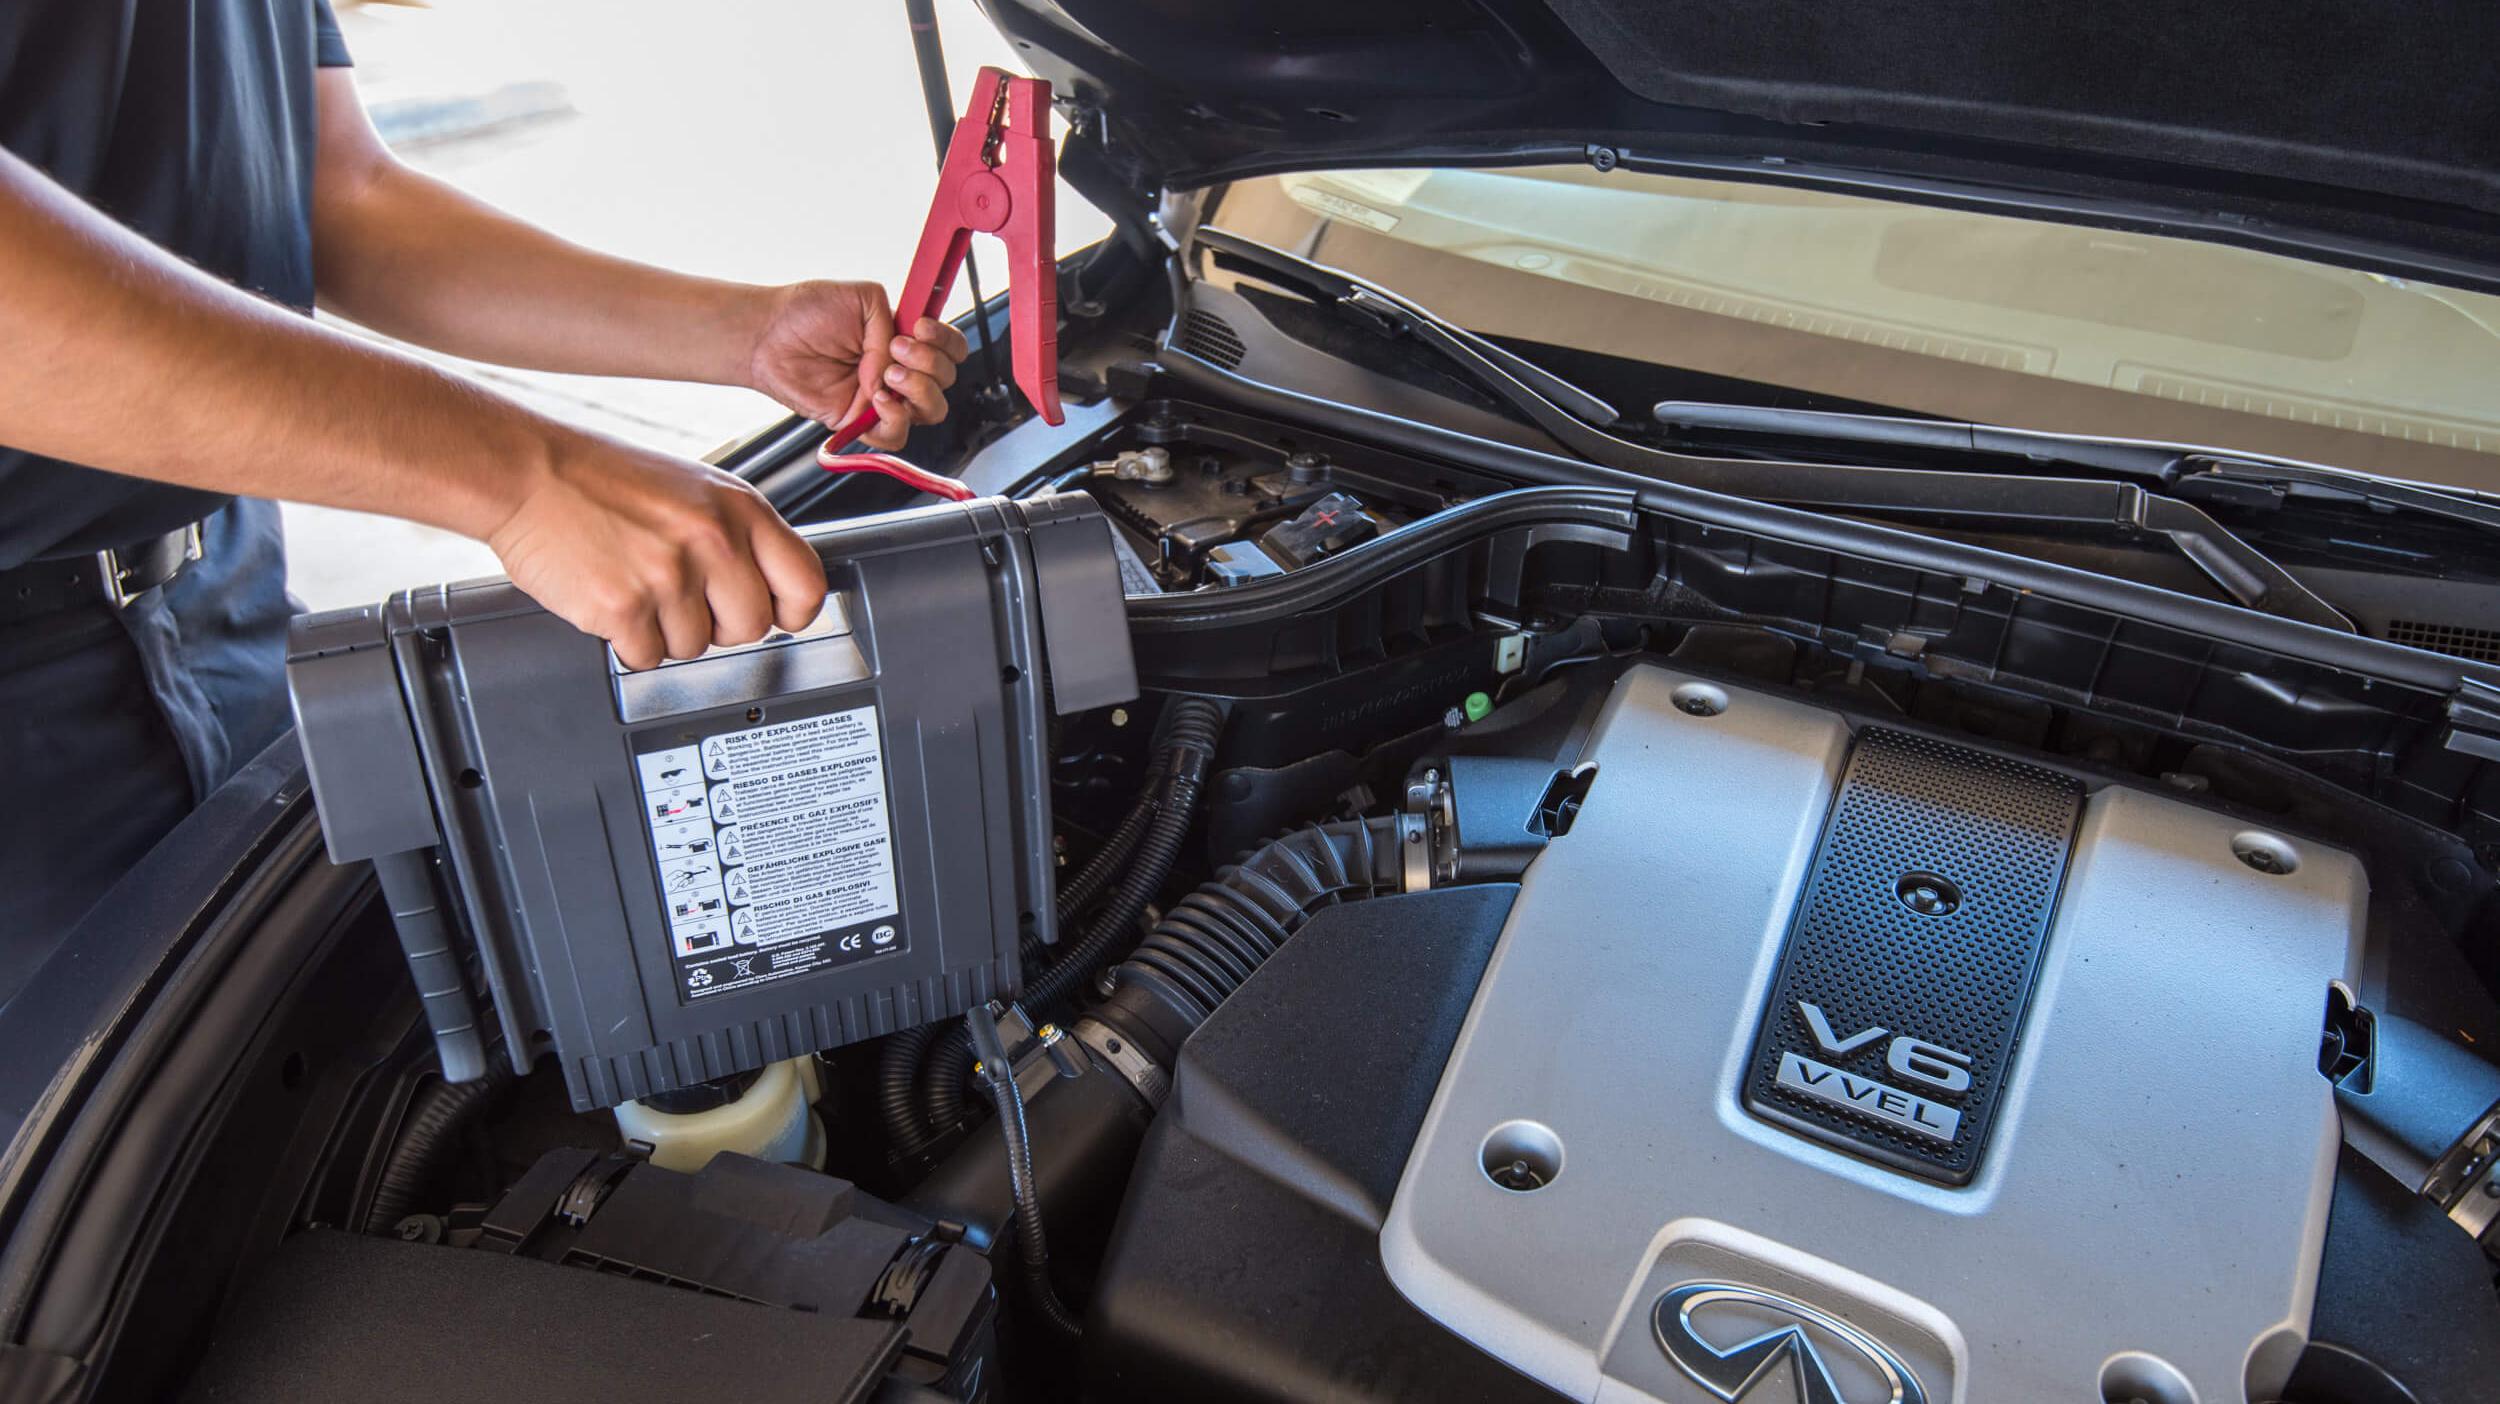 Technician performing service on an INFINITI vehicle